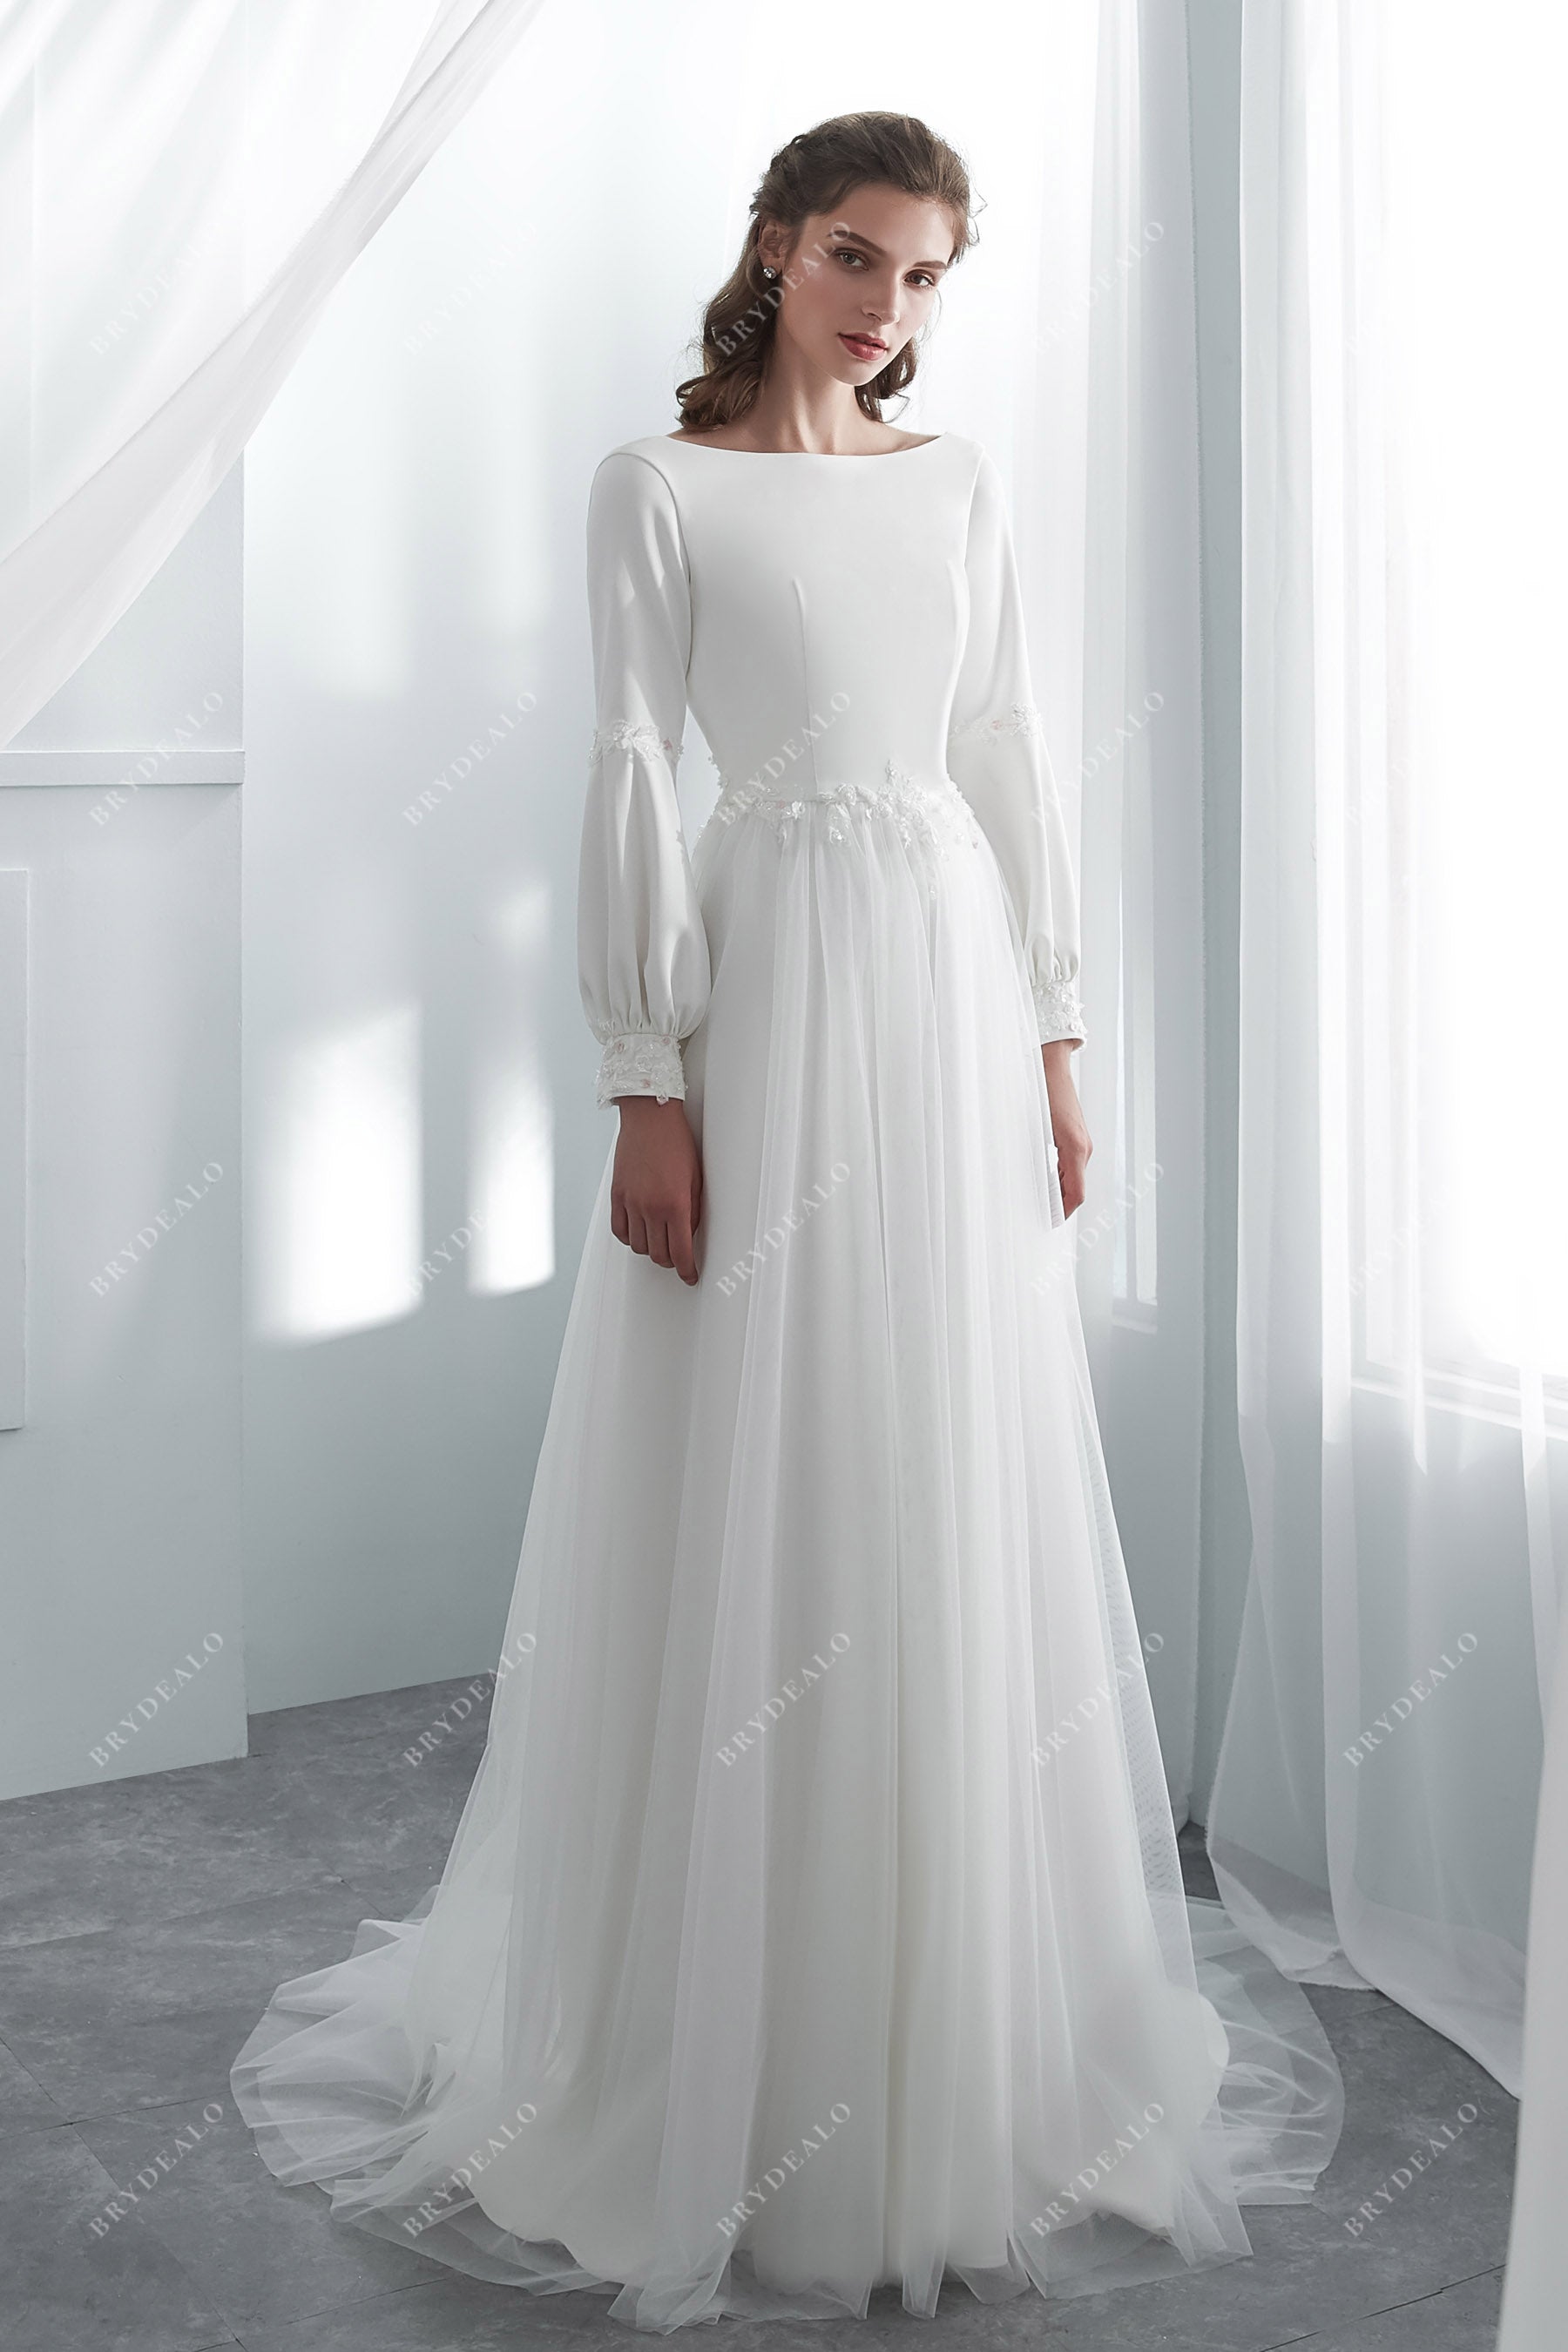 Simple Boho Wedding Dress with Bubble Sleeves